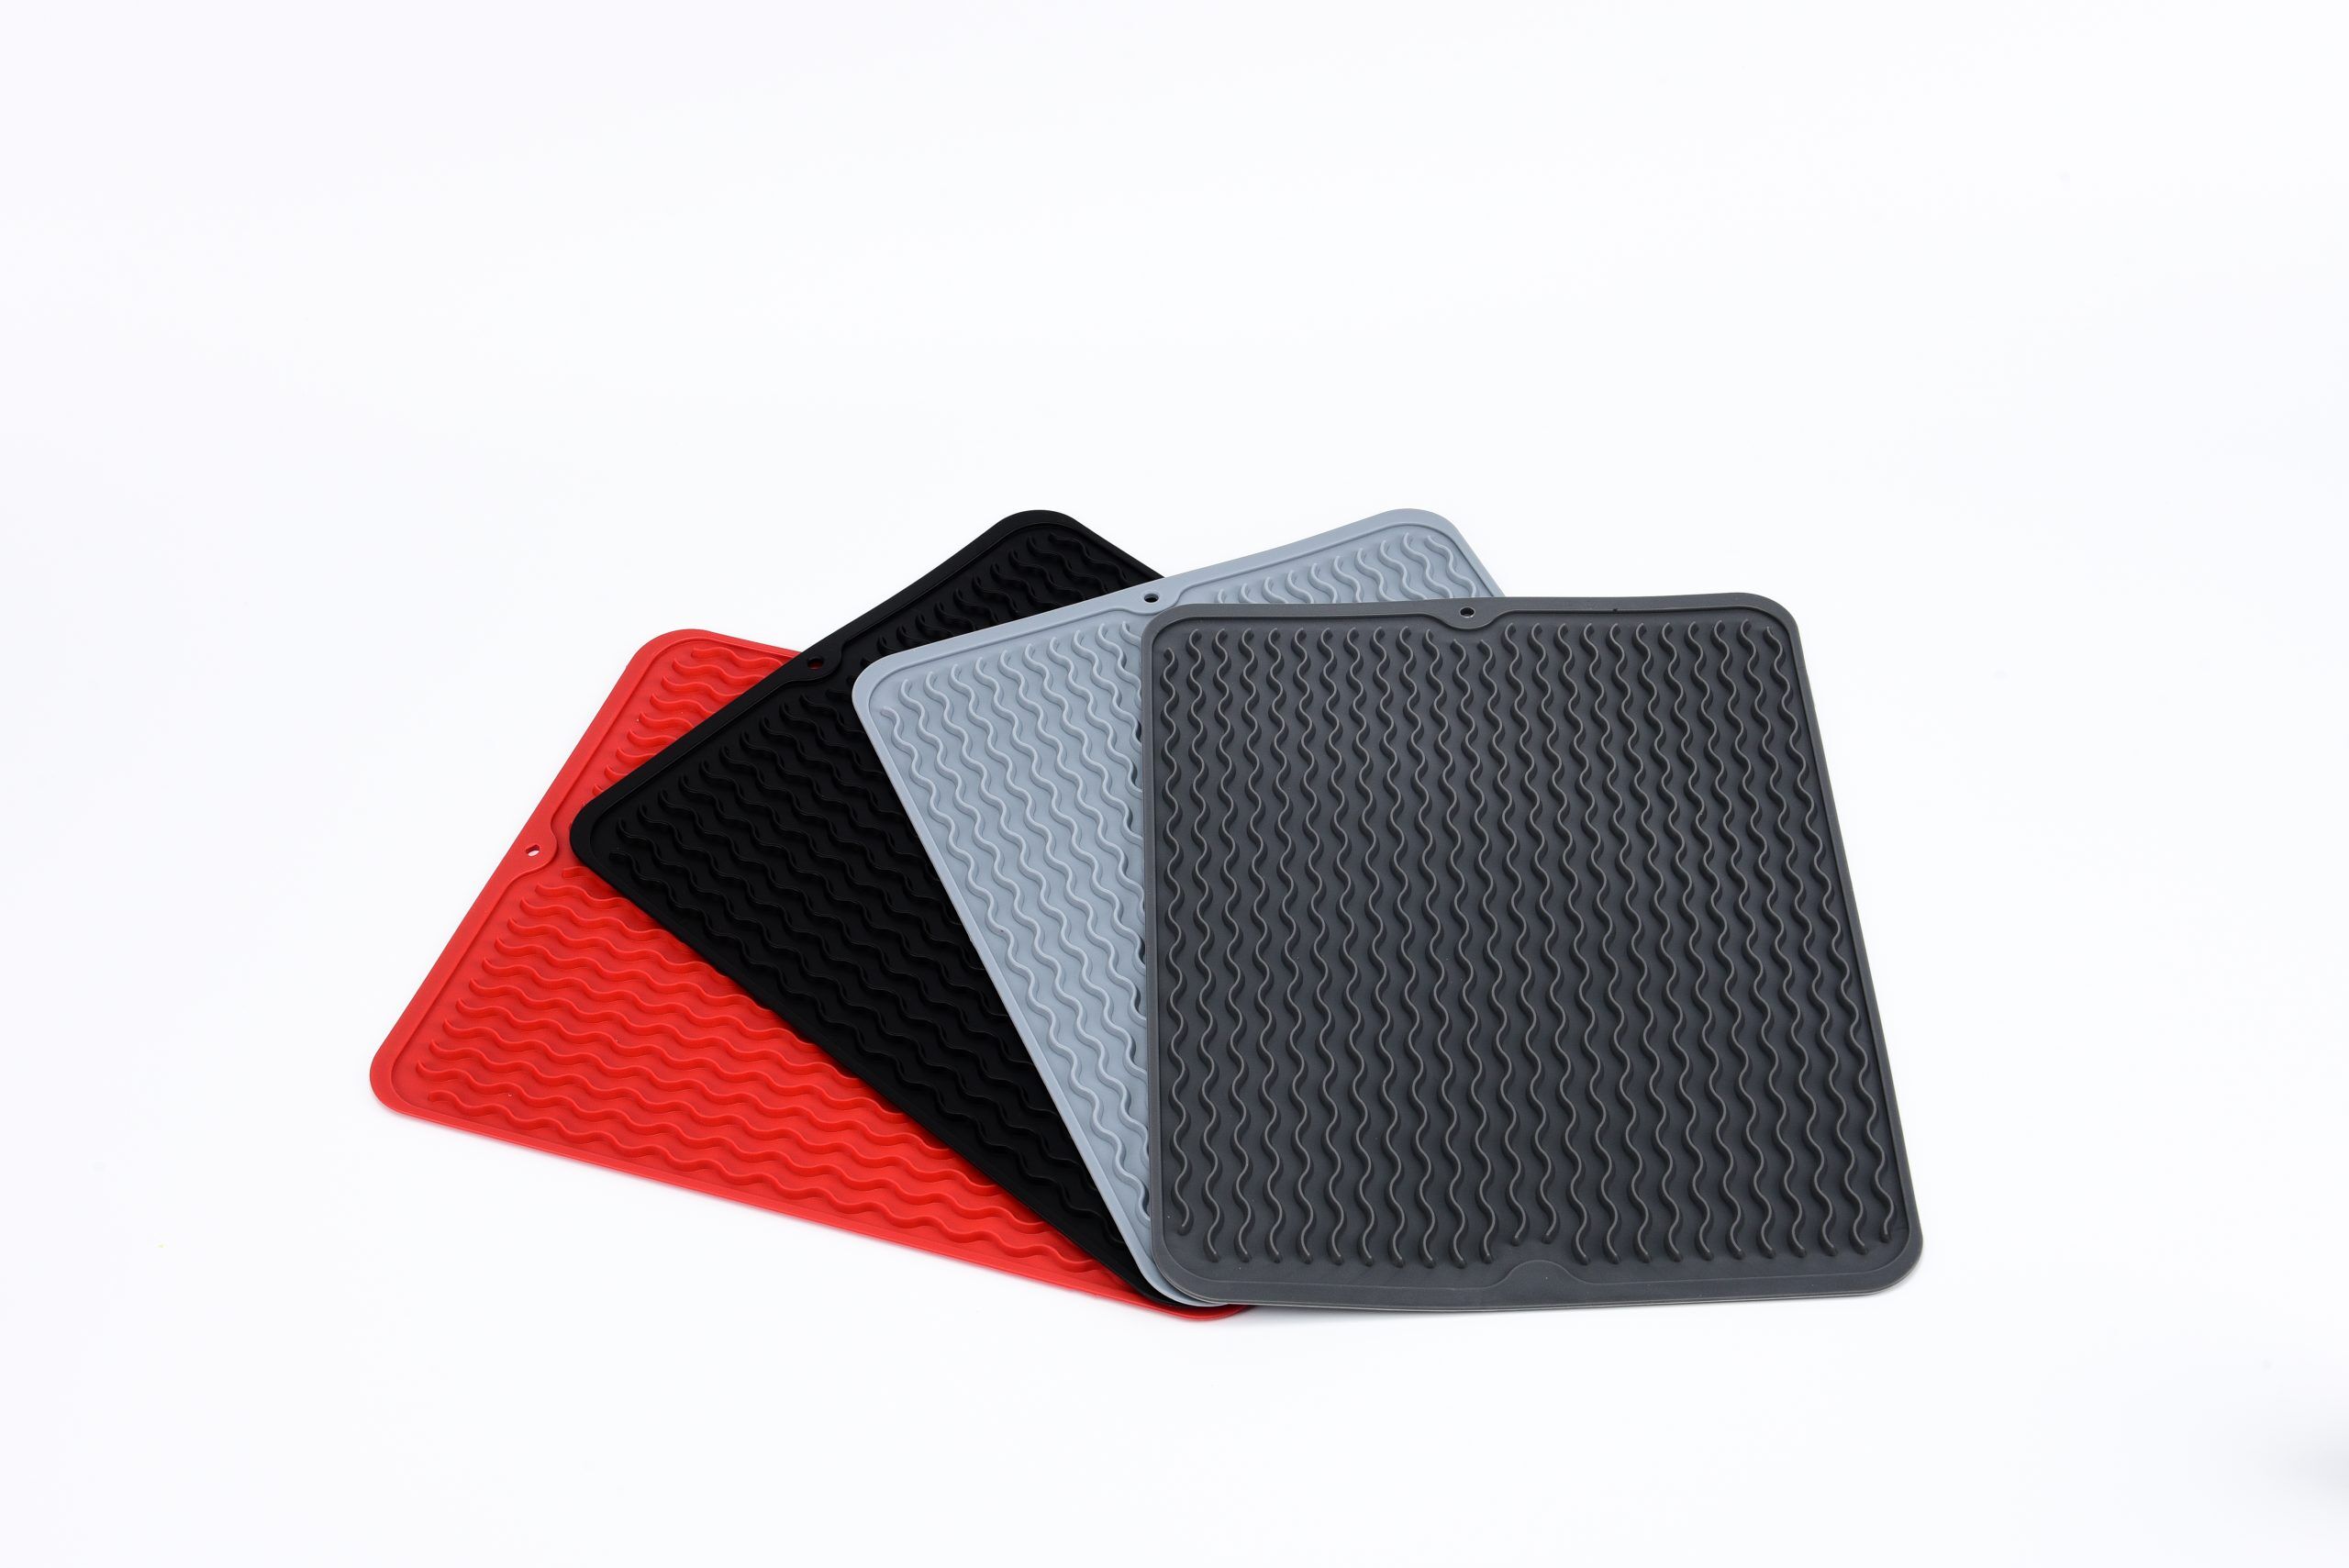 Wholesale Custom Quick Sin Dish Drying Mats for Kitchen Counter